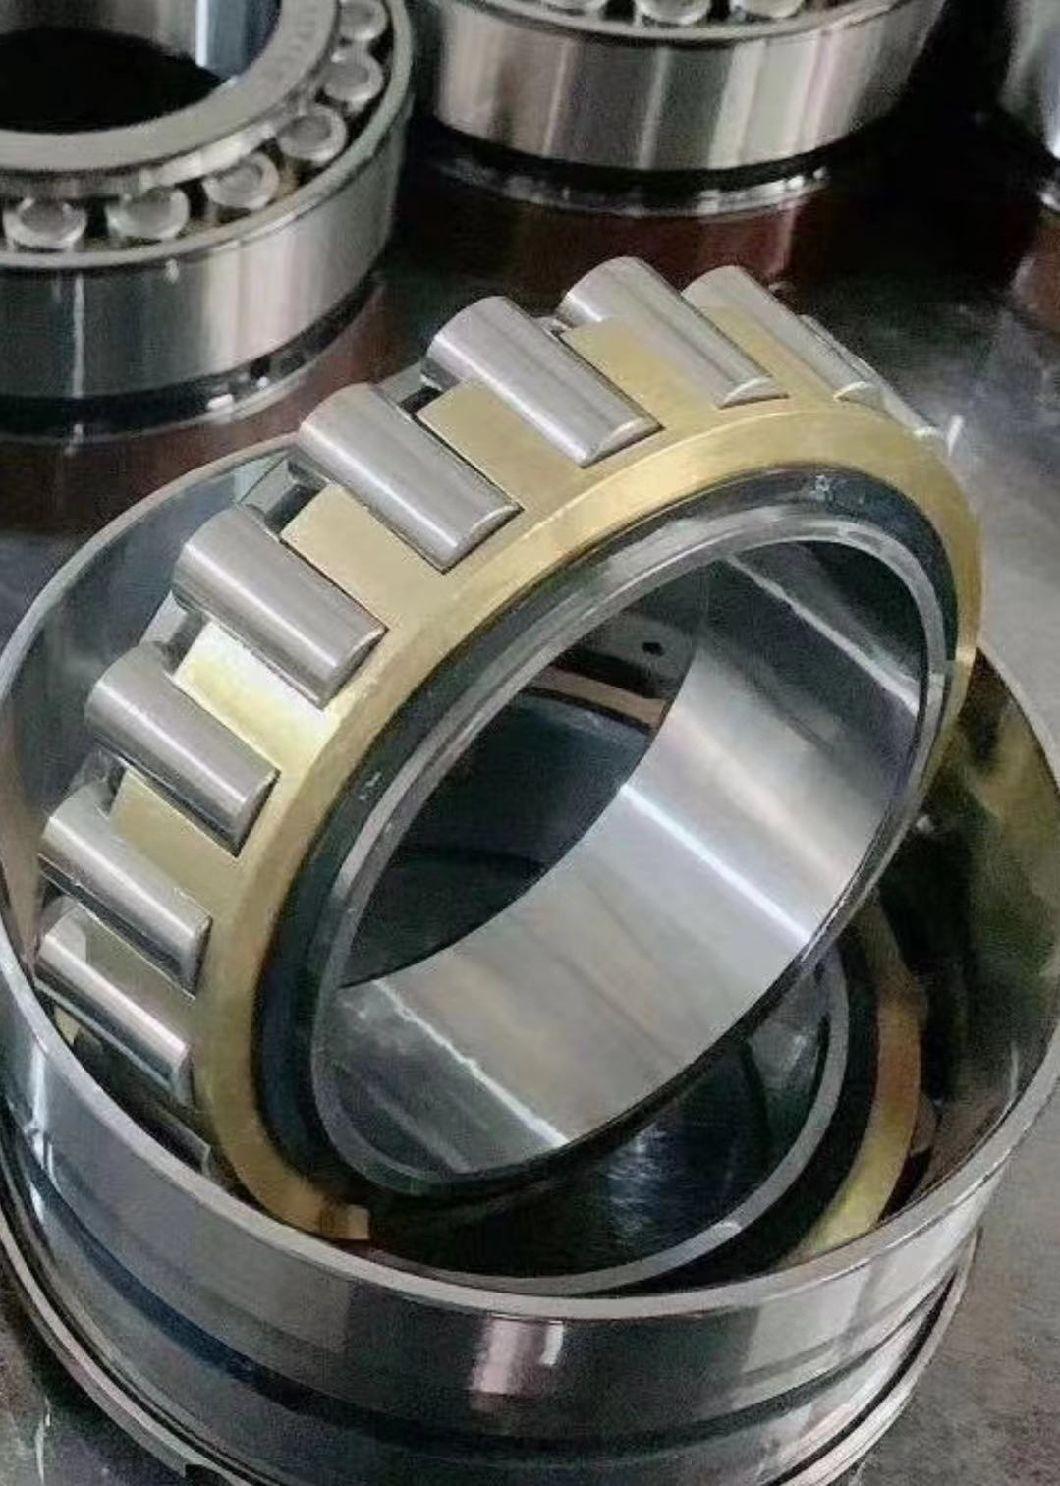 Tapered Roller Bearing 32219